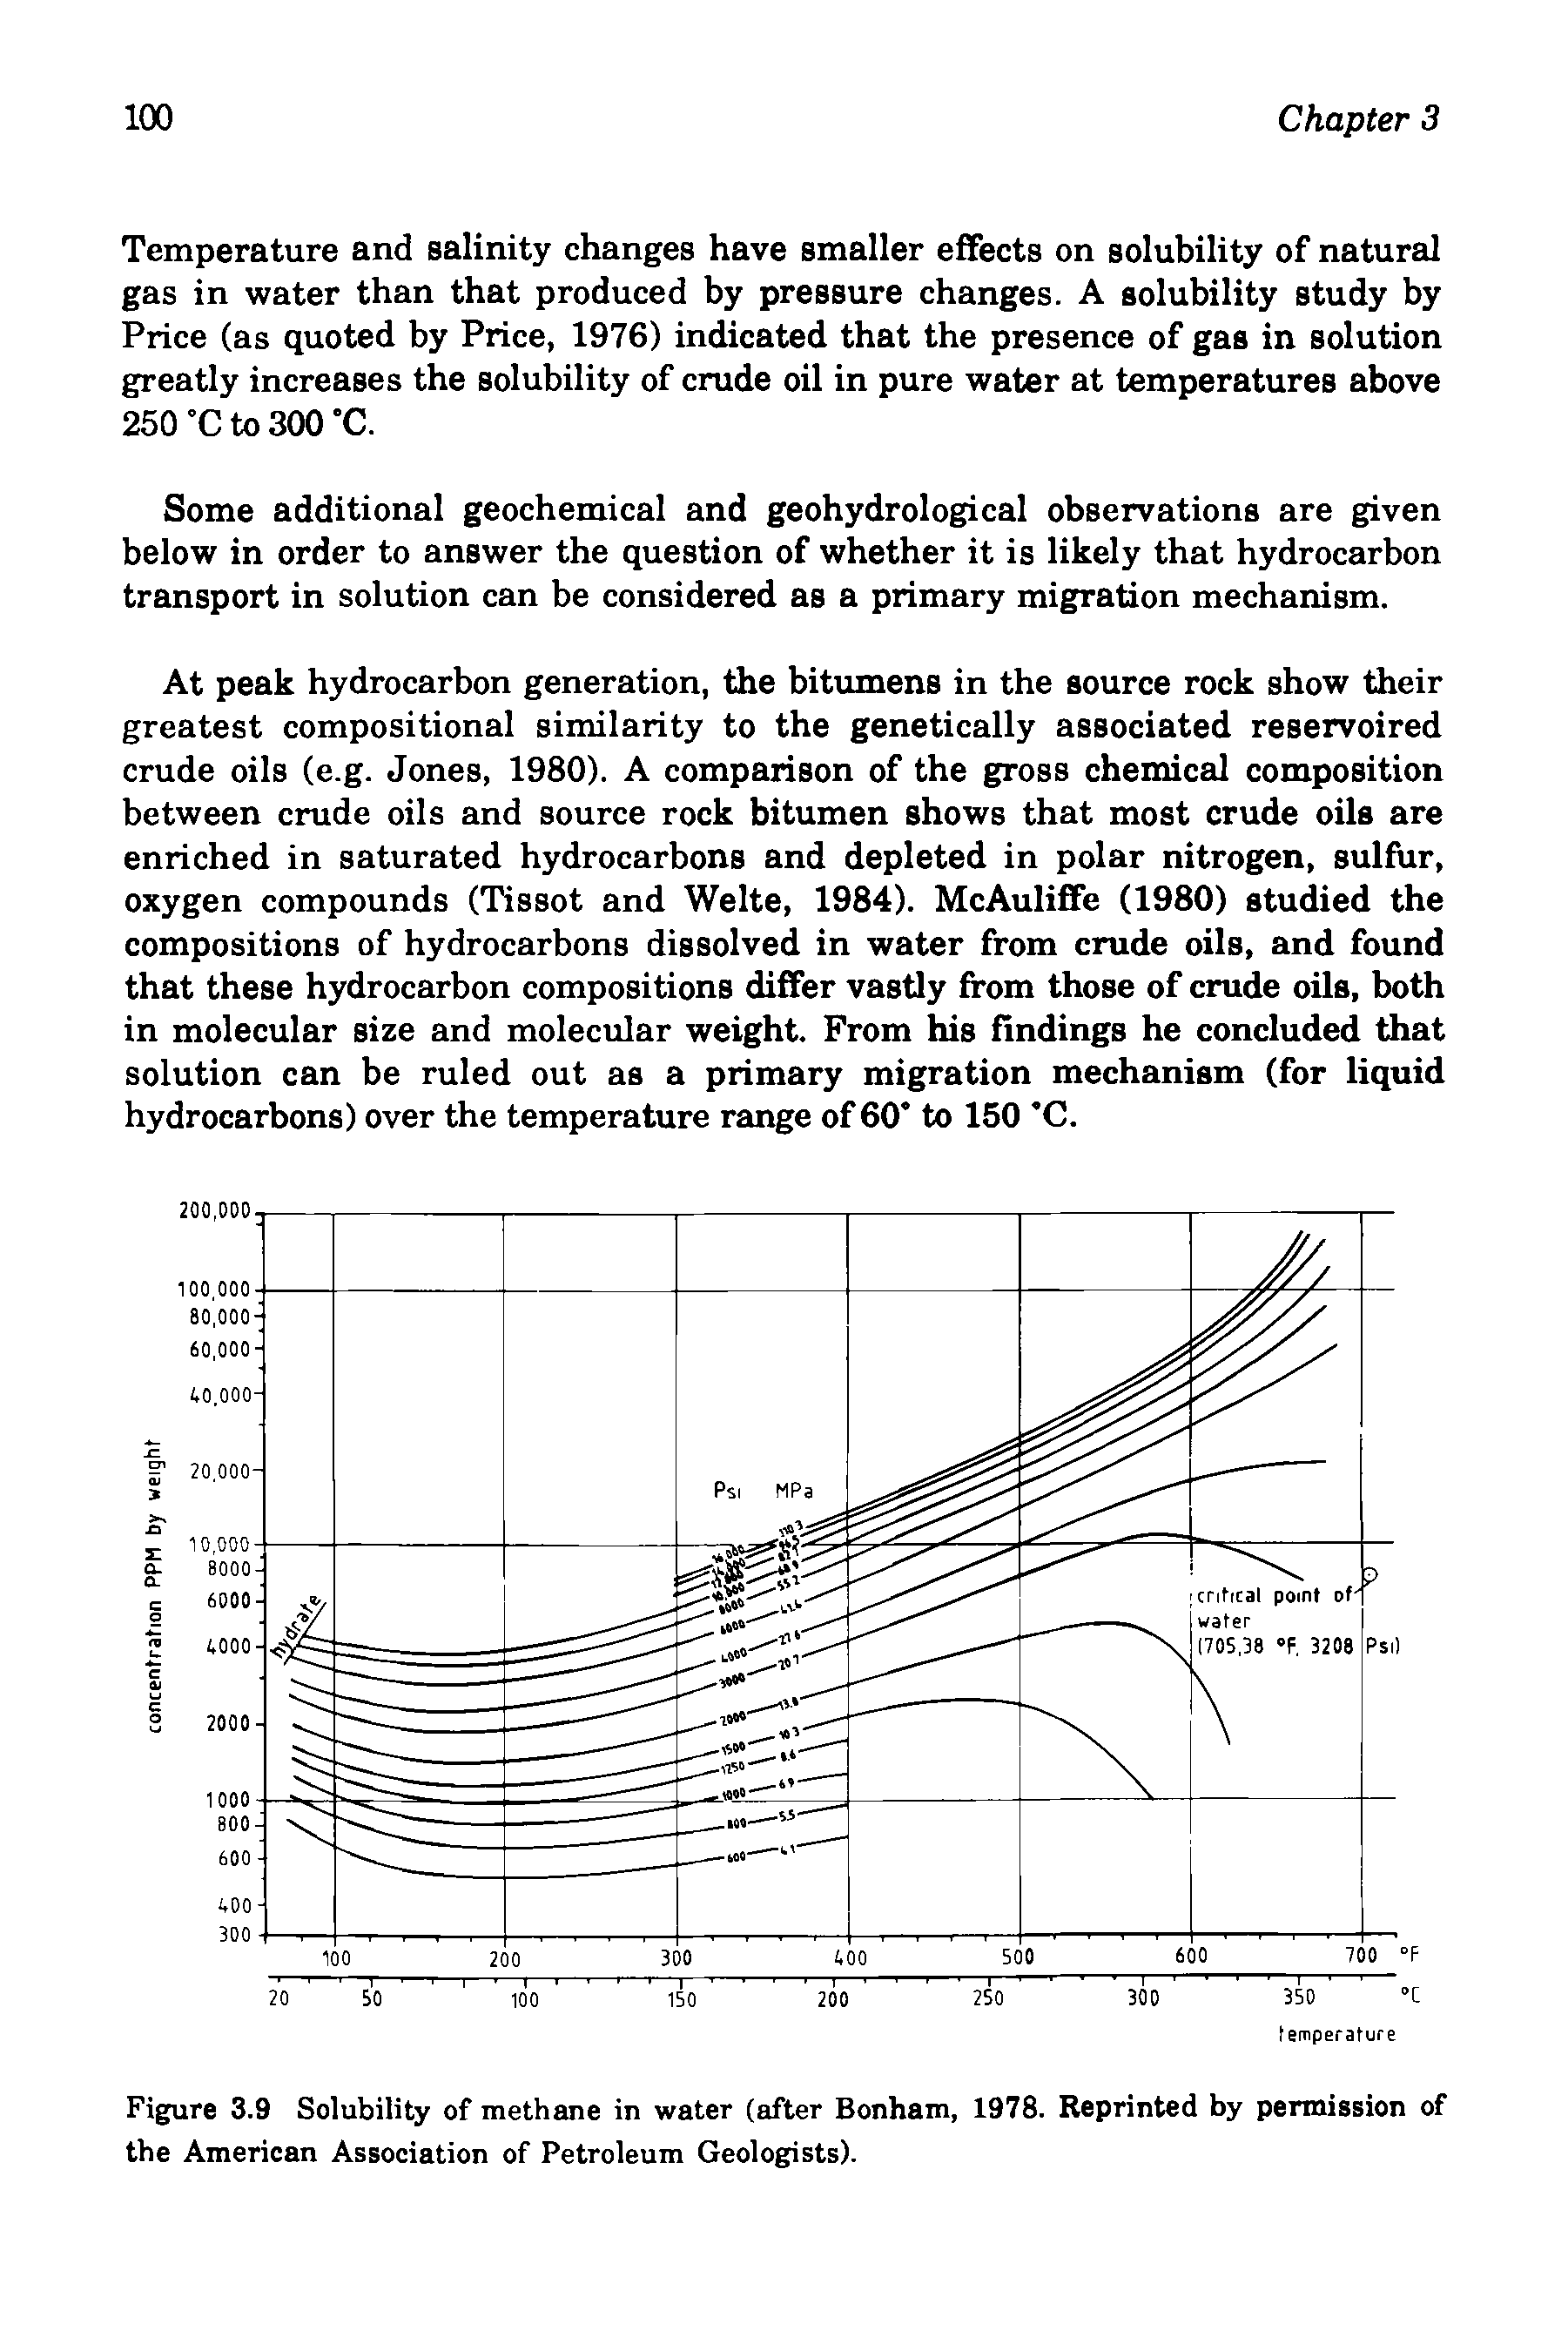 Figure 3.9 Solubility of methane in water (after Bonham, 1978. Reprinted by permission of the American Association of Petroleum Geologists).